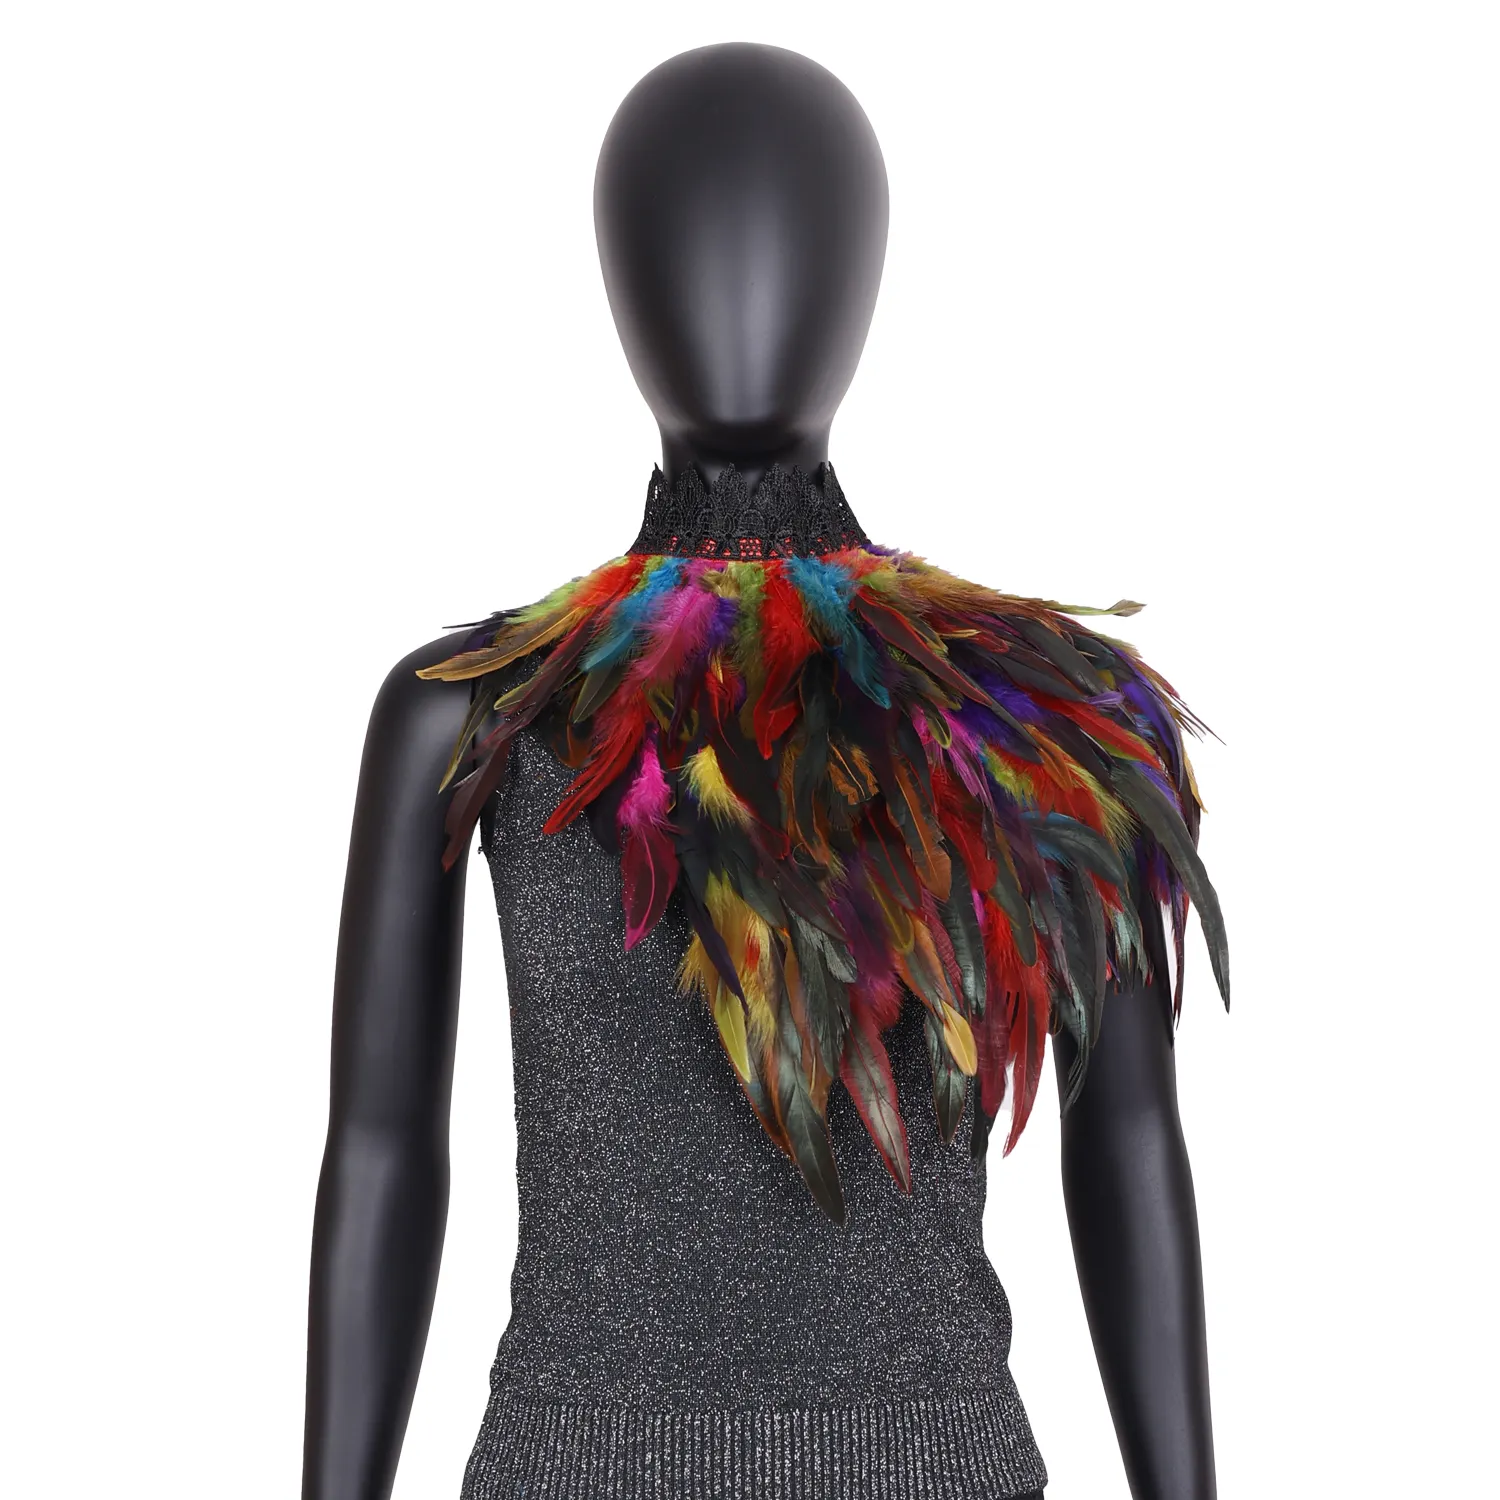 Women Feathers Primary Colors Shoulder Single Wings Costume Festival Punk Carnival Dressing Harness Bra Party Rave Dance Costume